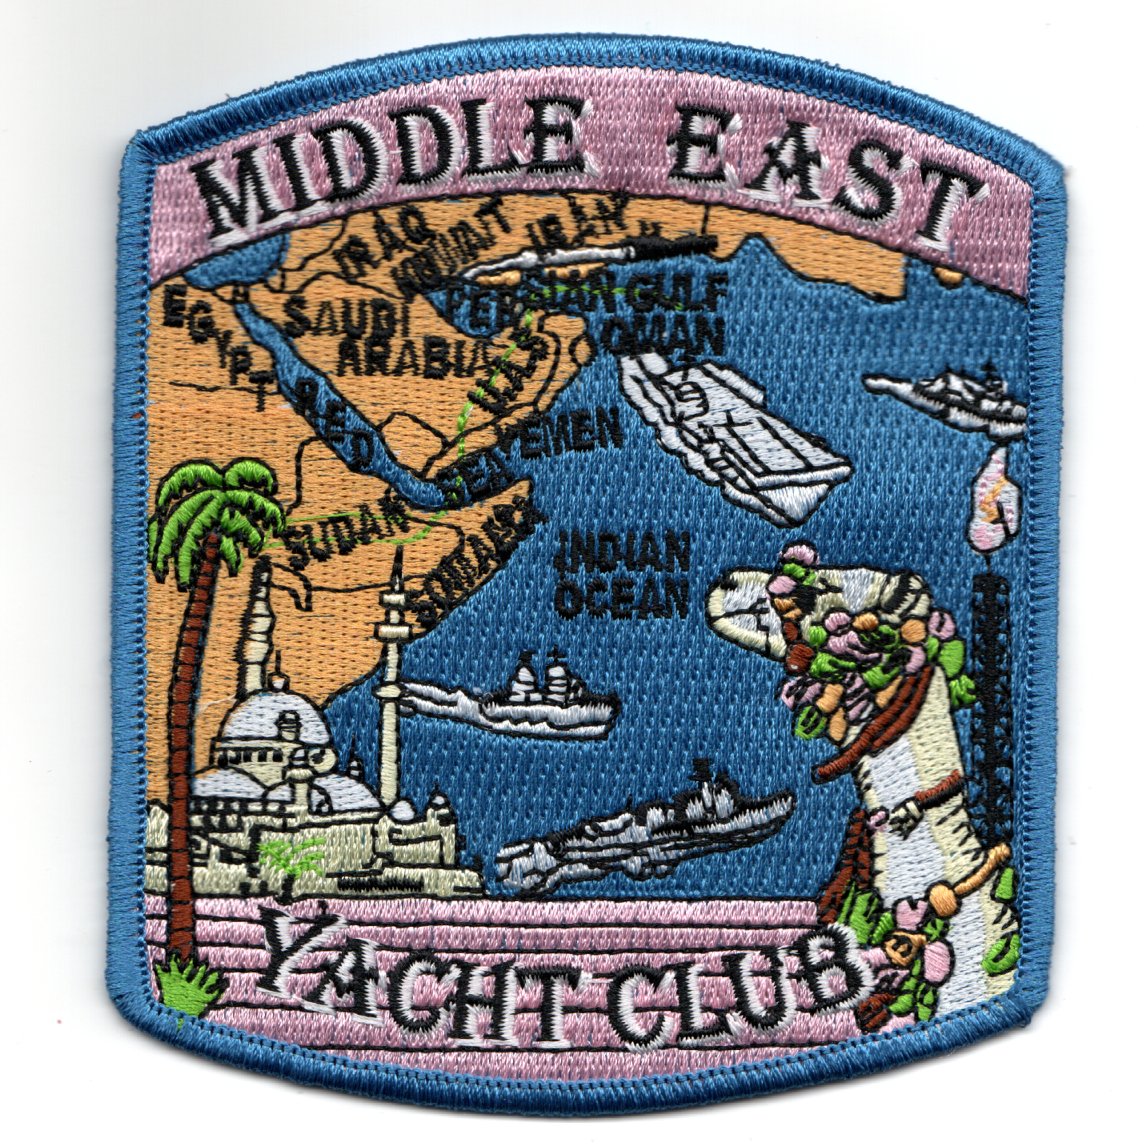 MIDDLE EAST Yacht Club (Blue/Pink)